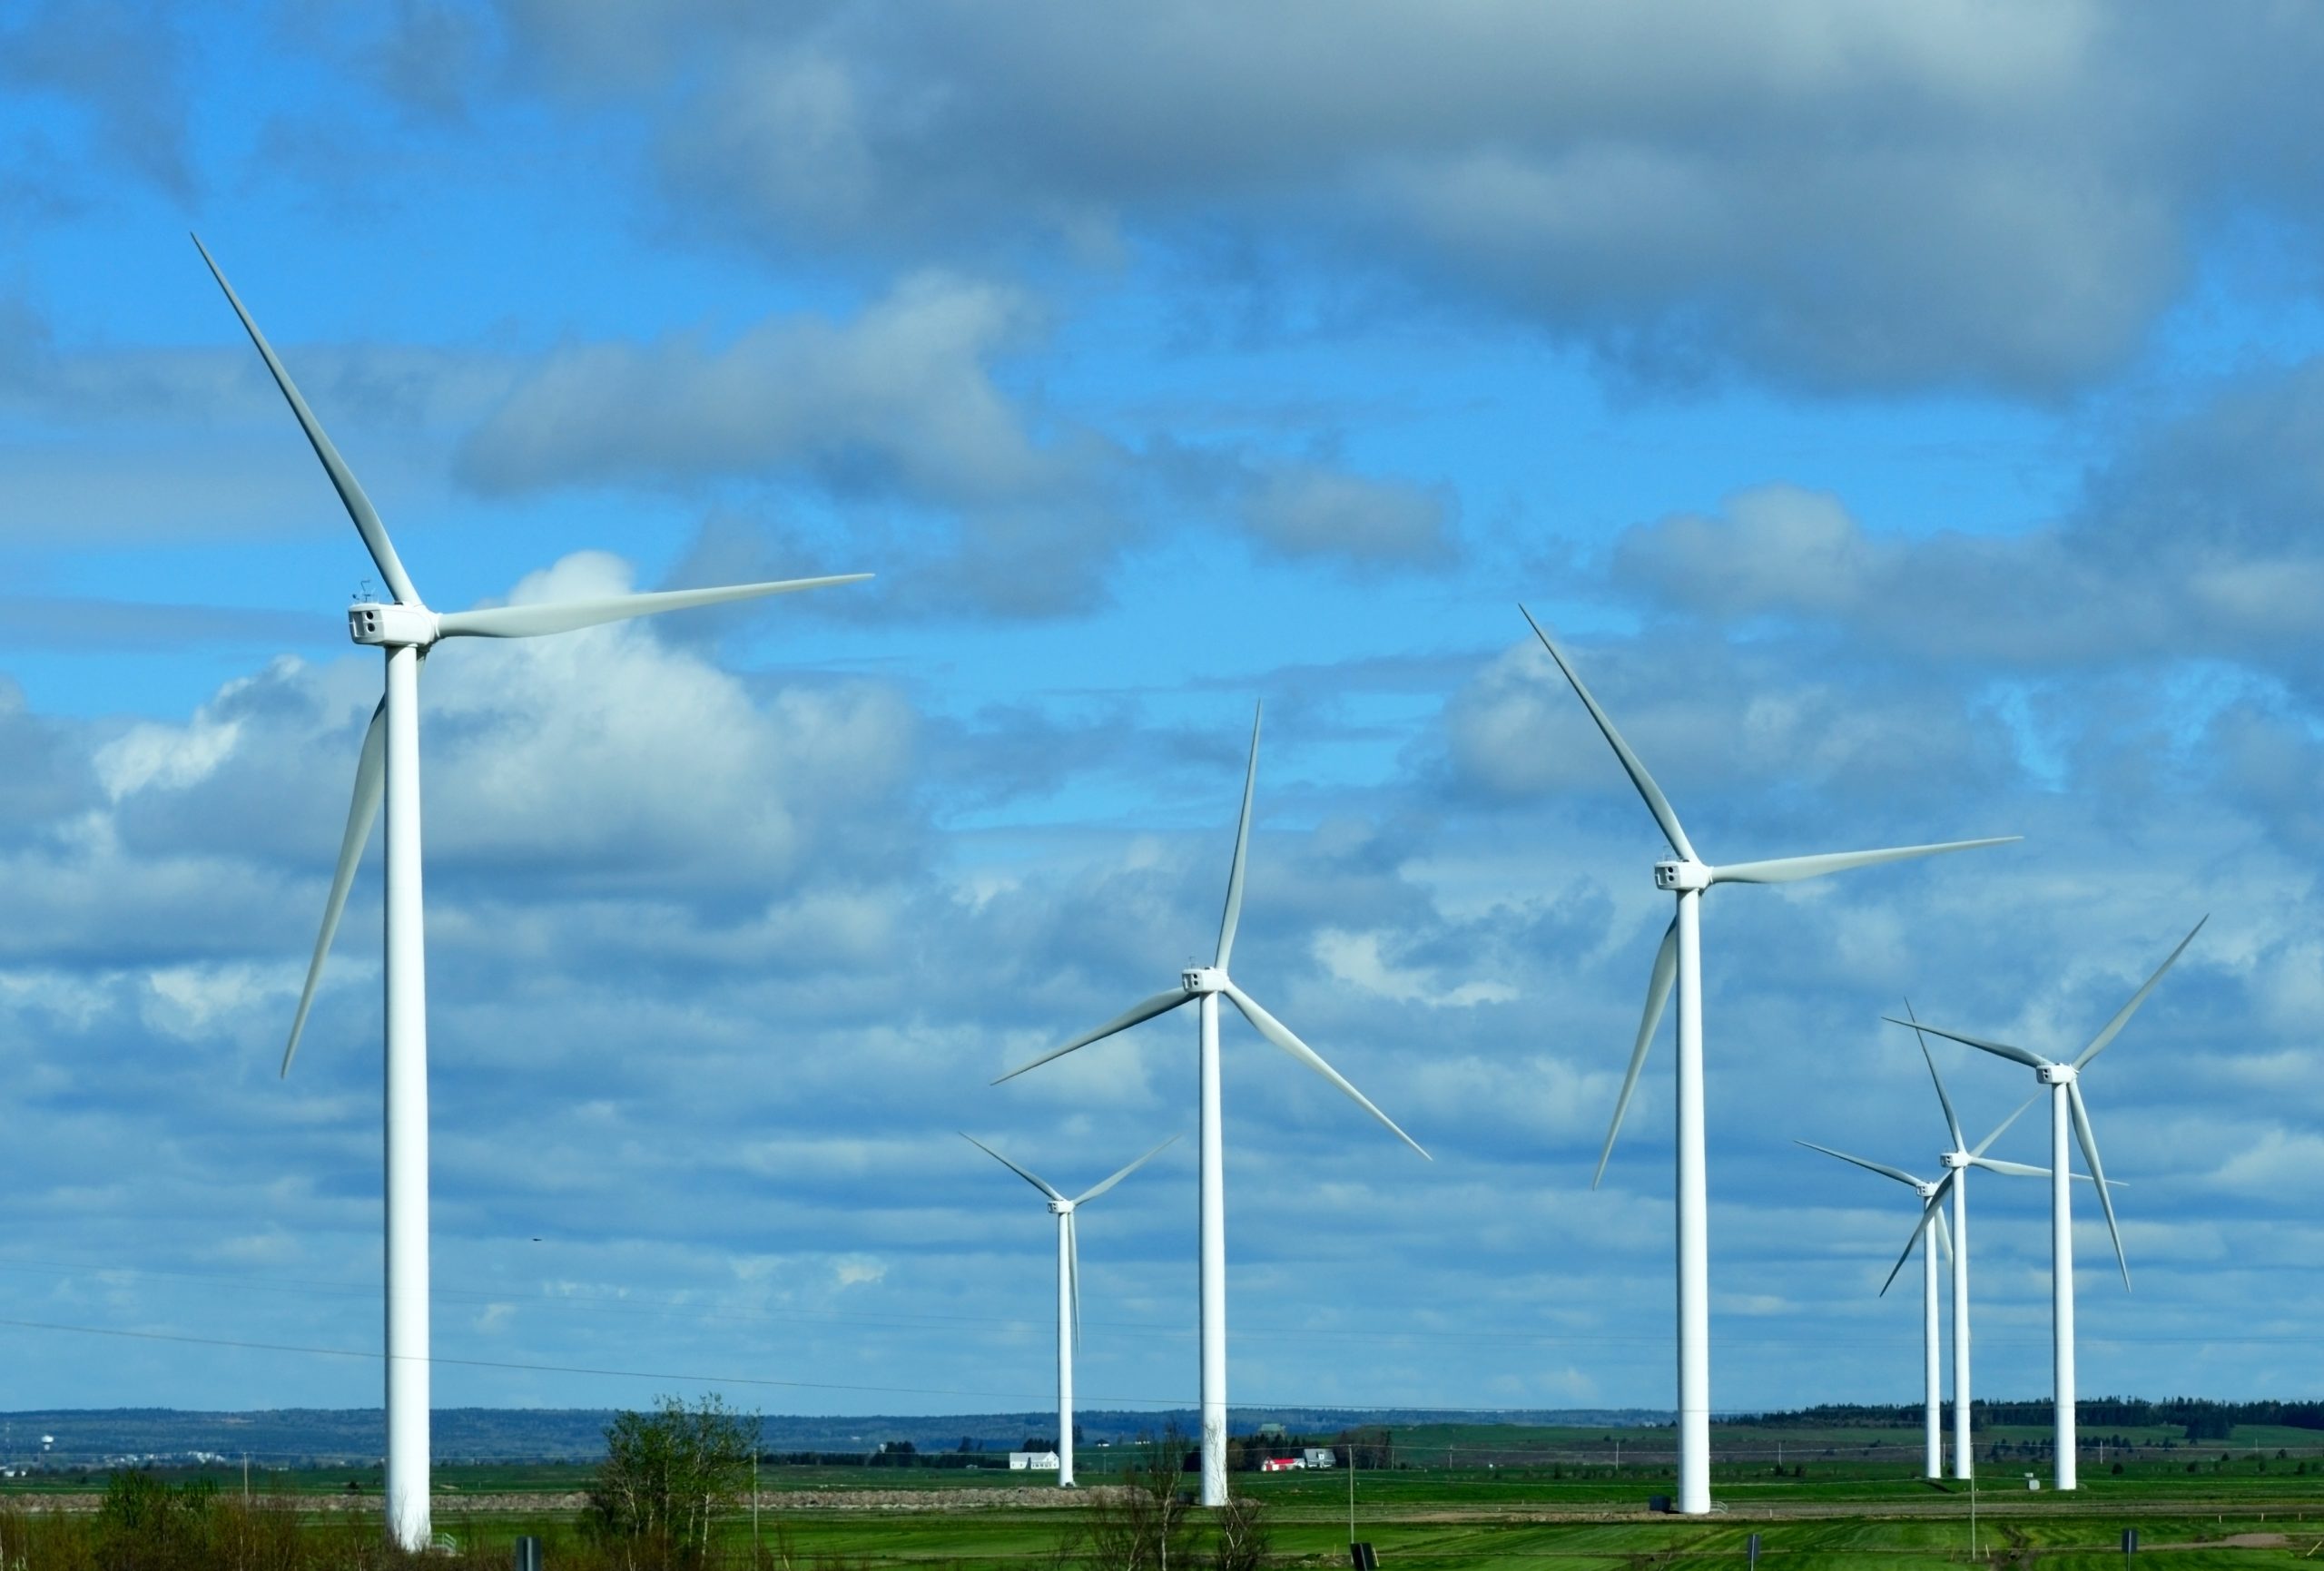 Canada's eco-friendly Clean Energy initiatives